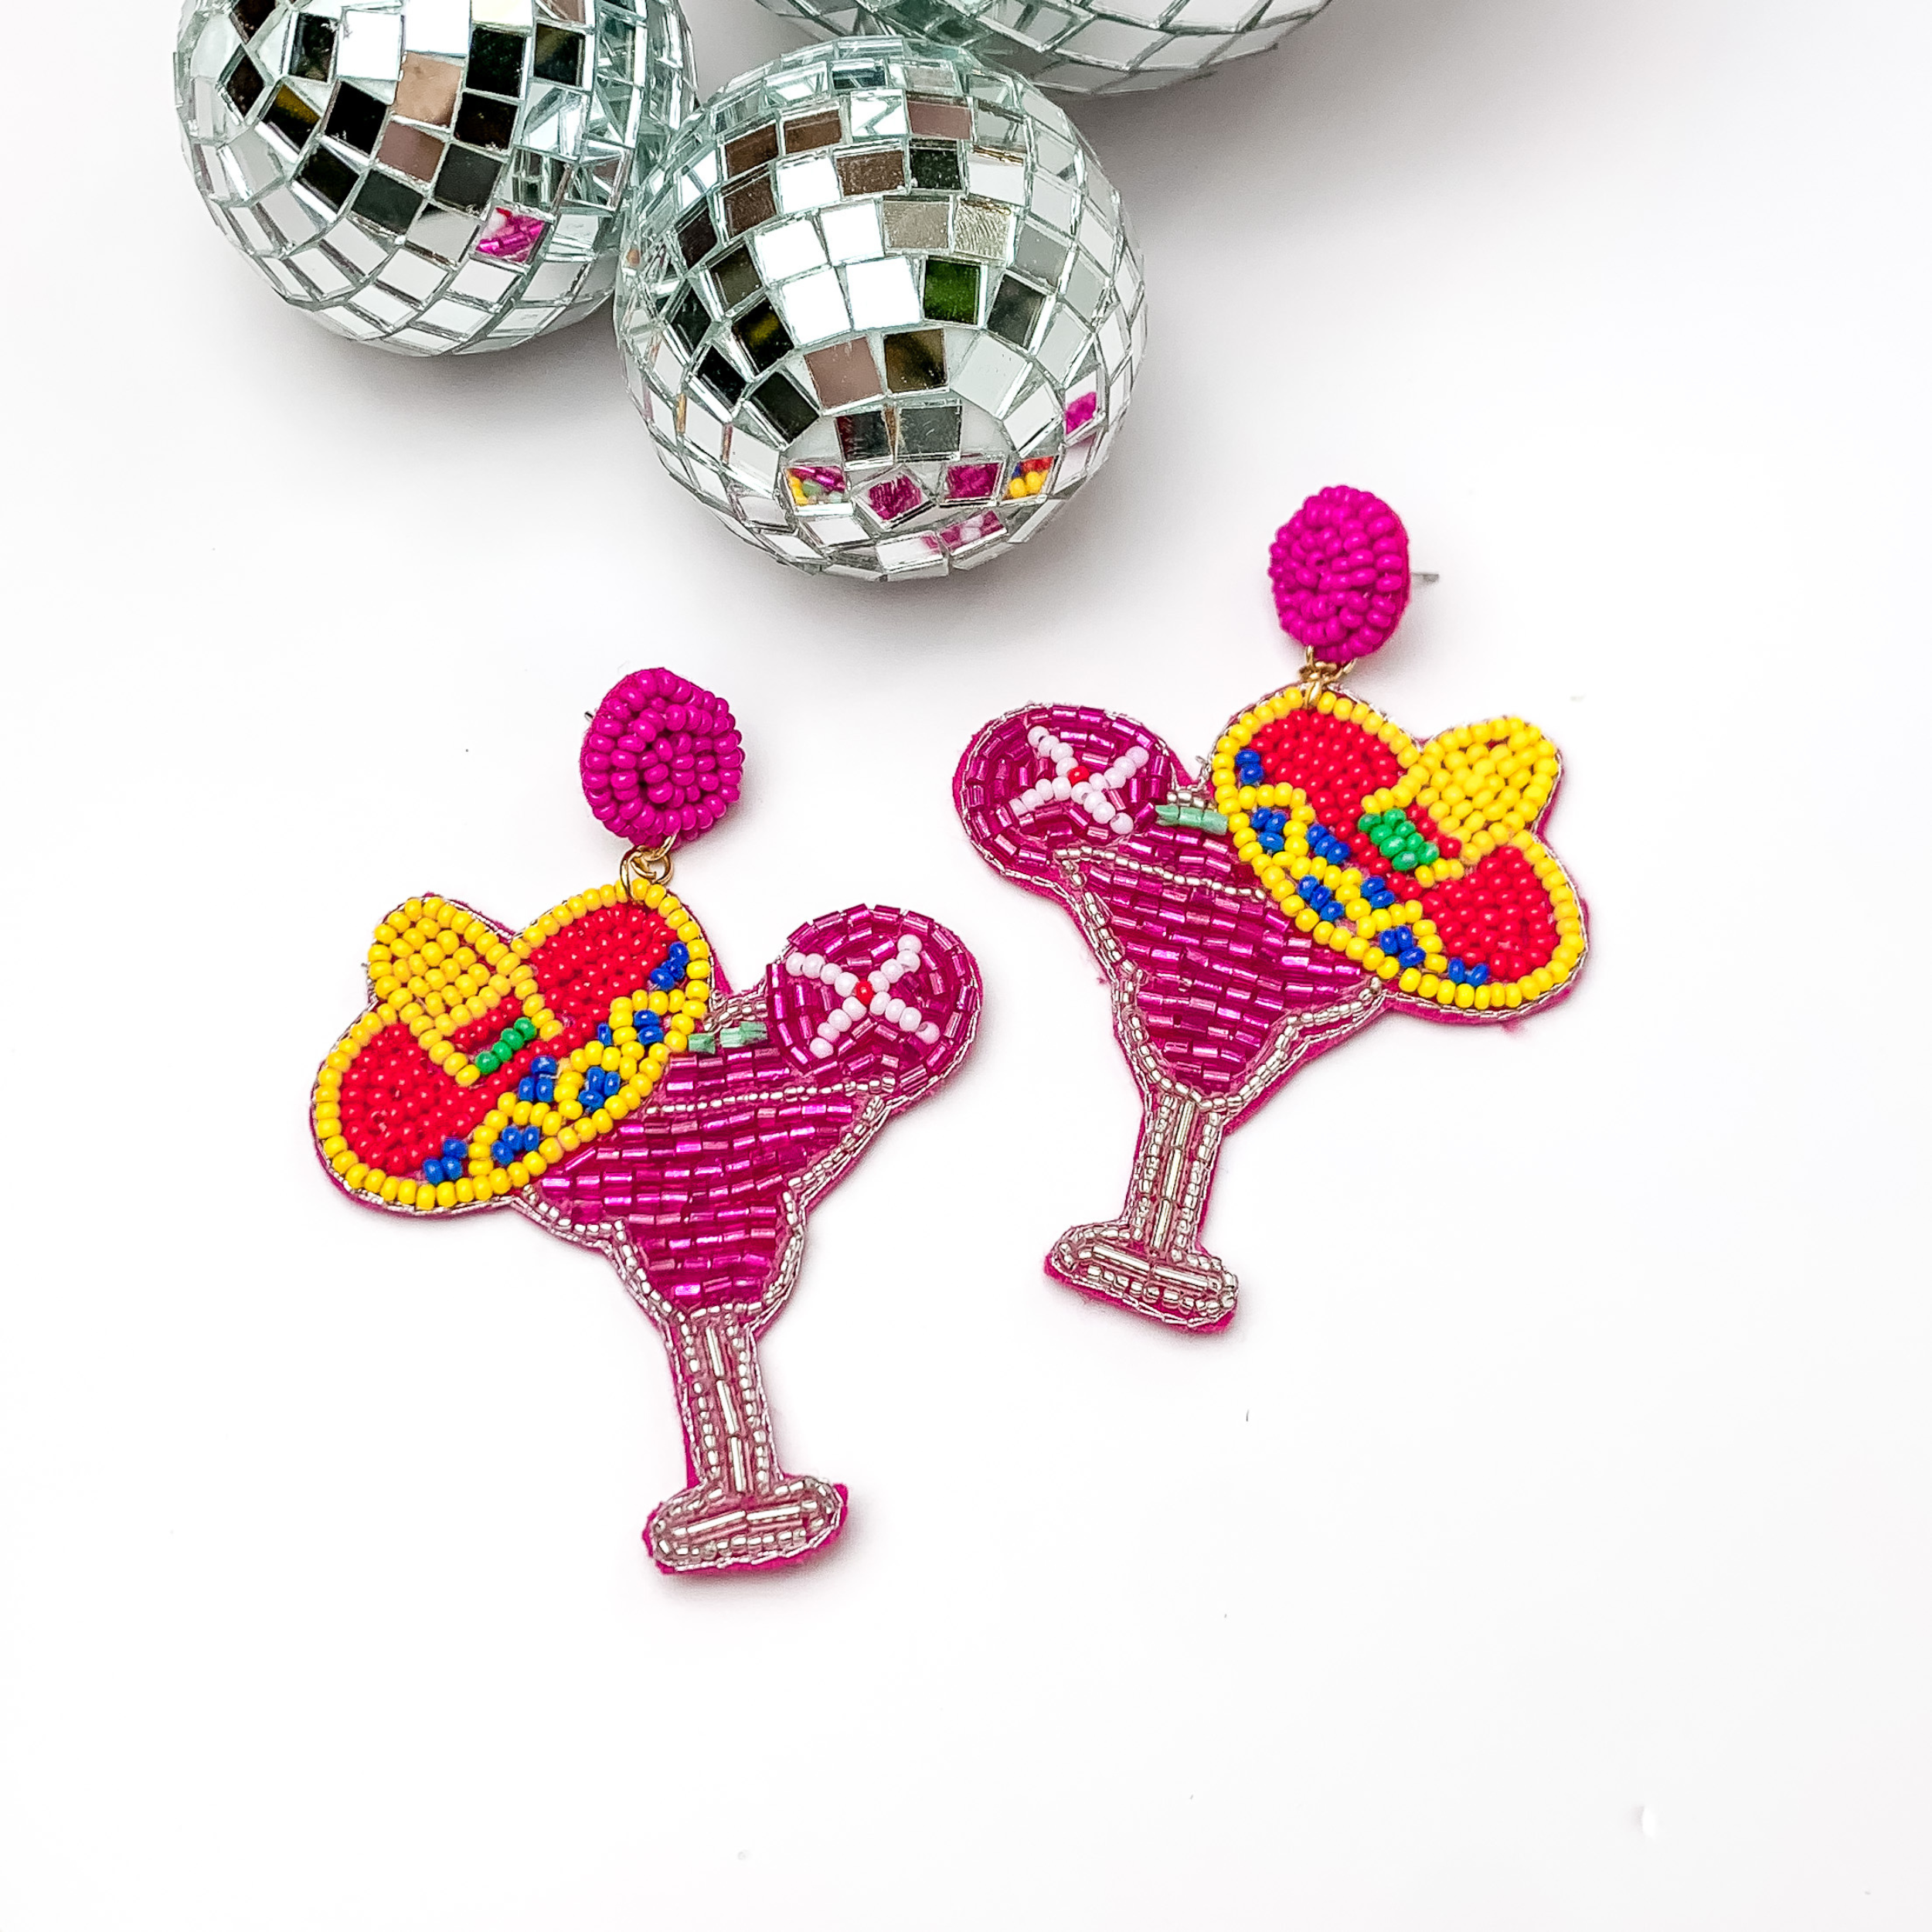 Margarita sombrero seed beaded drop earrings in pink. The sombrero has yellow, dark blue, and red sequins. Taken in a white background with disco balls in the left corner.